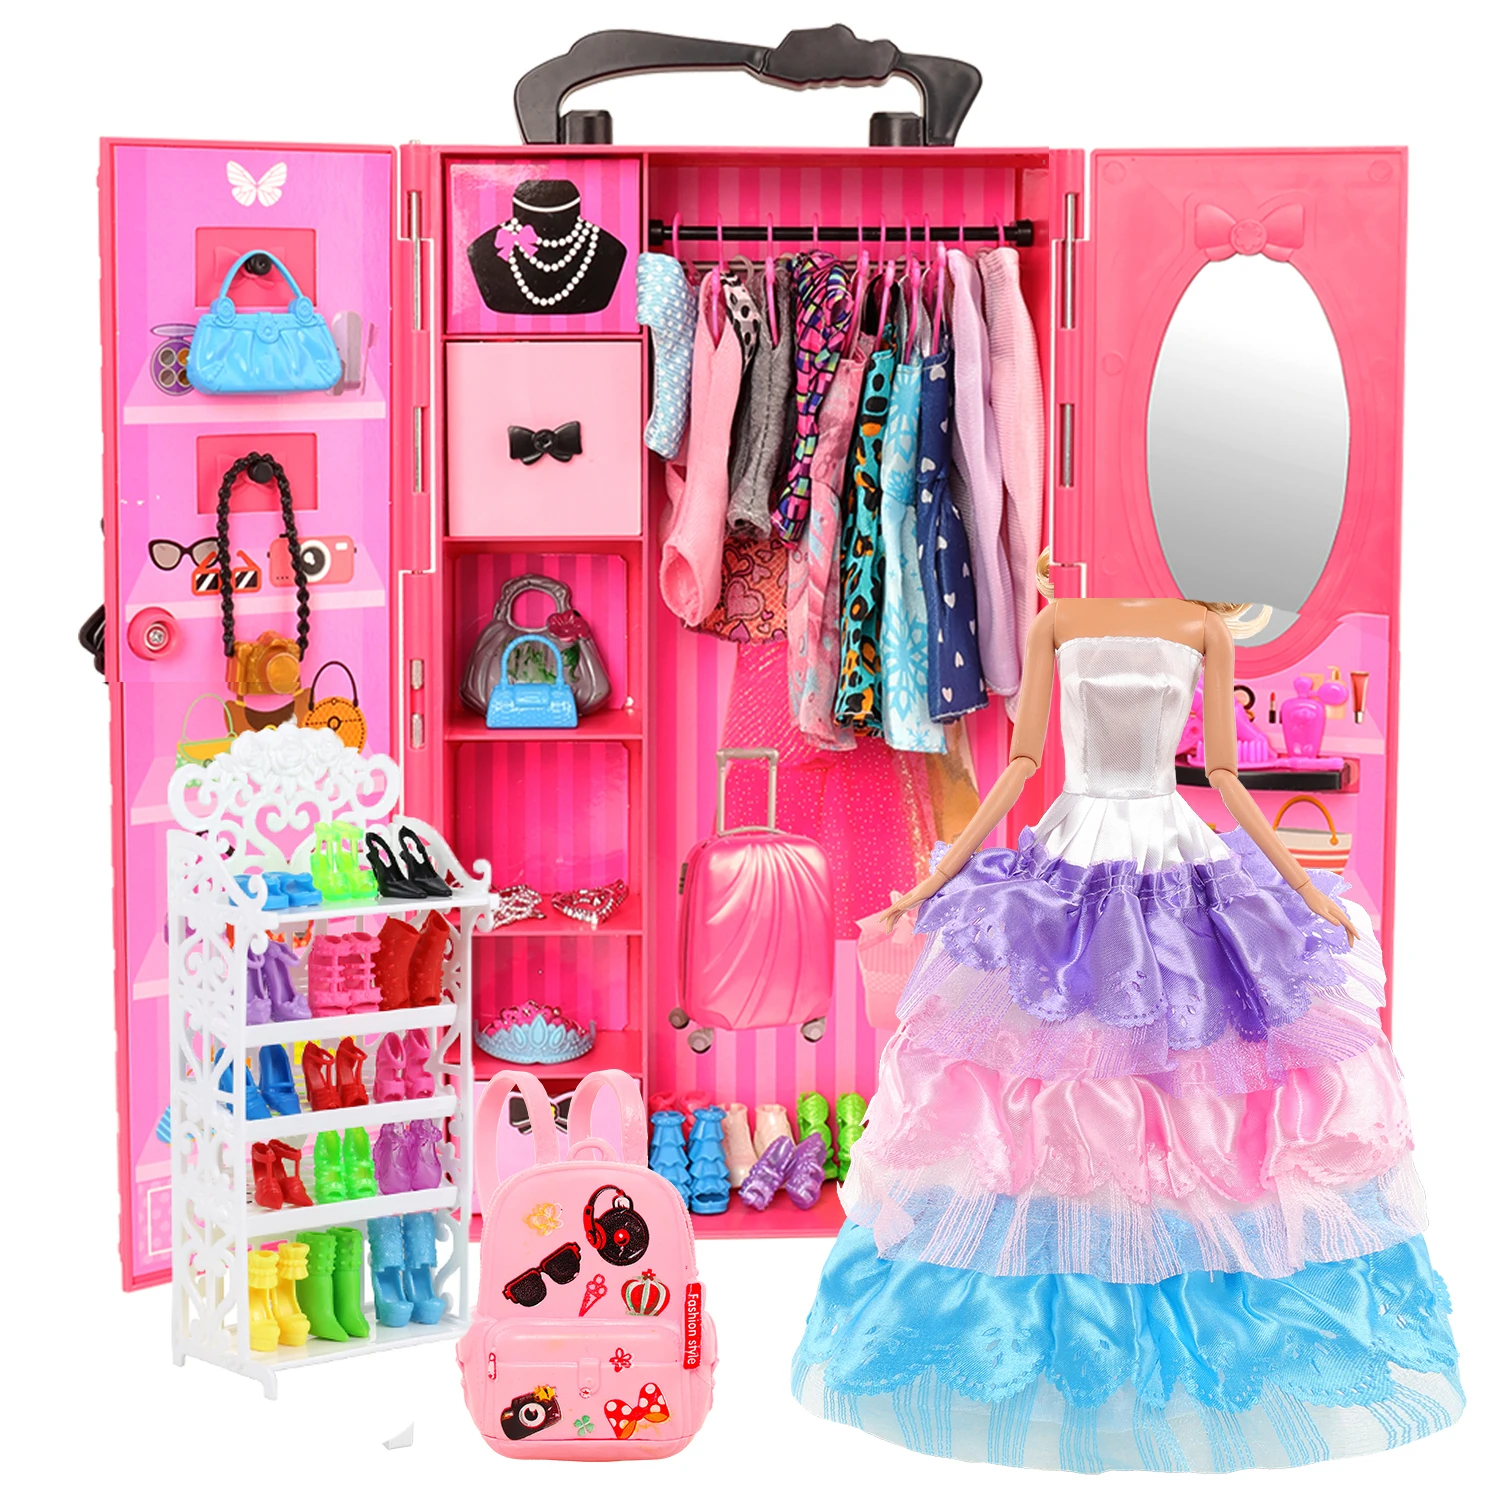 Doll House Funiture 42 Item =1 Wardrobe + 41 Accessories Dress Crown Necklace Shoes Glasses For Barbie Toys Gift Girls Closet